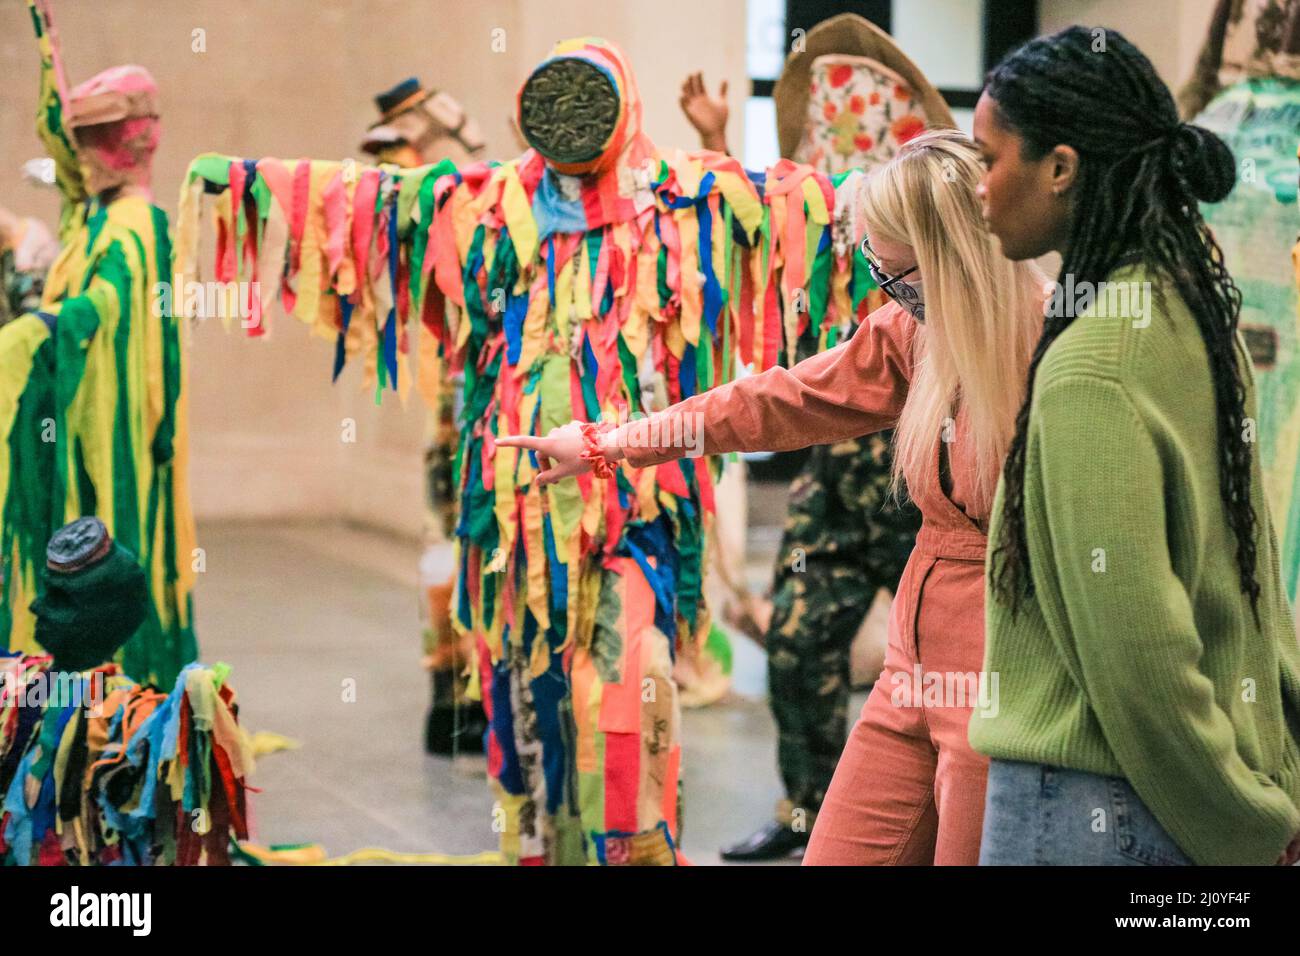 London, UK, 21st March 2022. Tate staffers with 'The Procession', which is one large installation with many different elements. Influence of both Indian and Indo-Caribbean culture, including many carnival elements, can be seen. According to Locke, 'The Procession' is not a historic textbook, but rather an 'extended poem of contrasting references and imagery. The annual Tate Britain Commission has been undertaken by Guyanese-British artist Hew Locke with 'The Procession'. Credit: Imageplotter/Alamy Live News Stock Photo